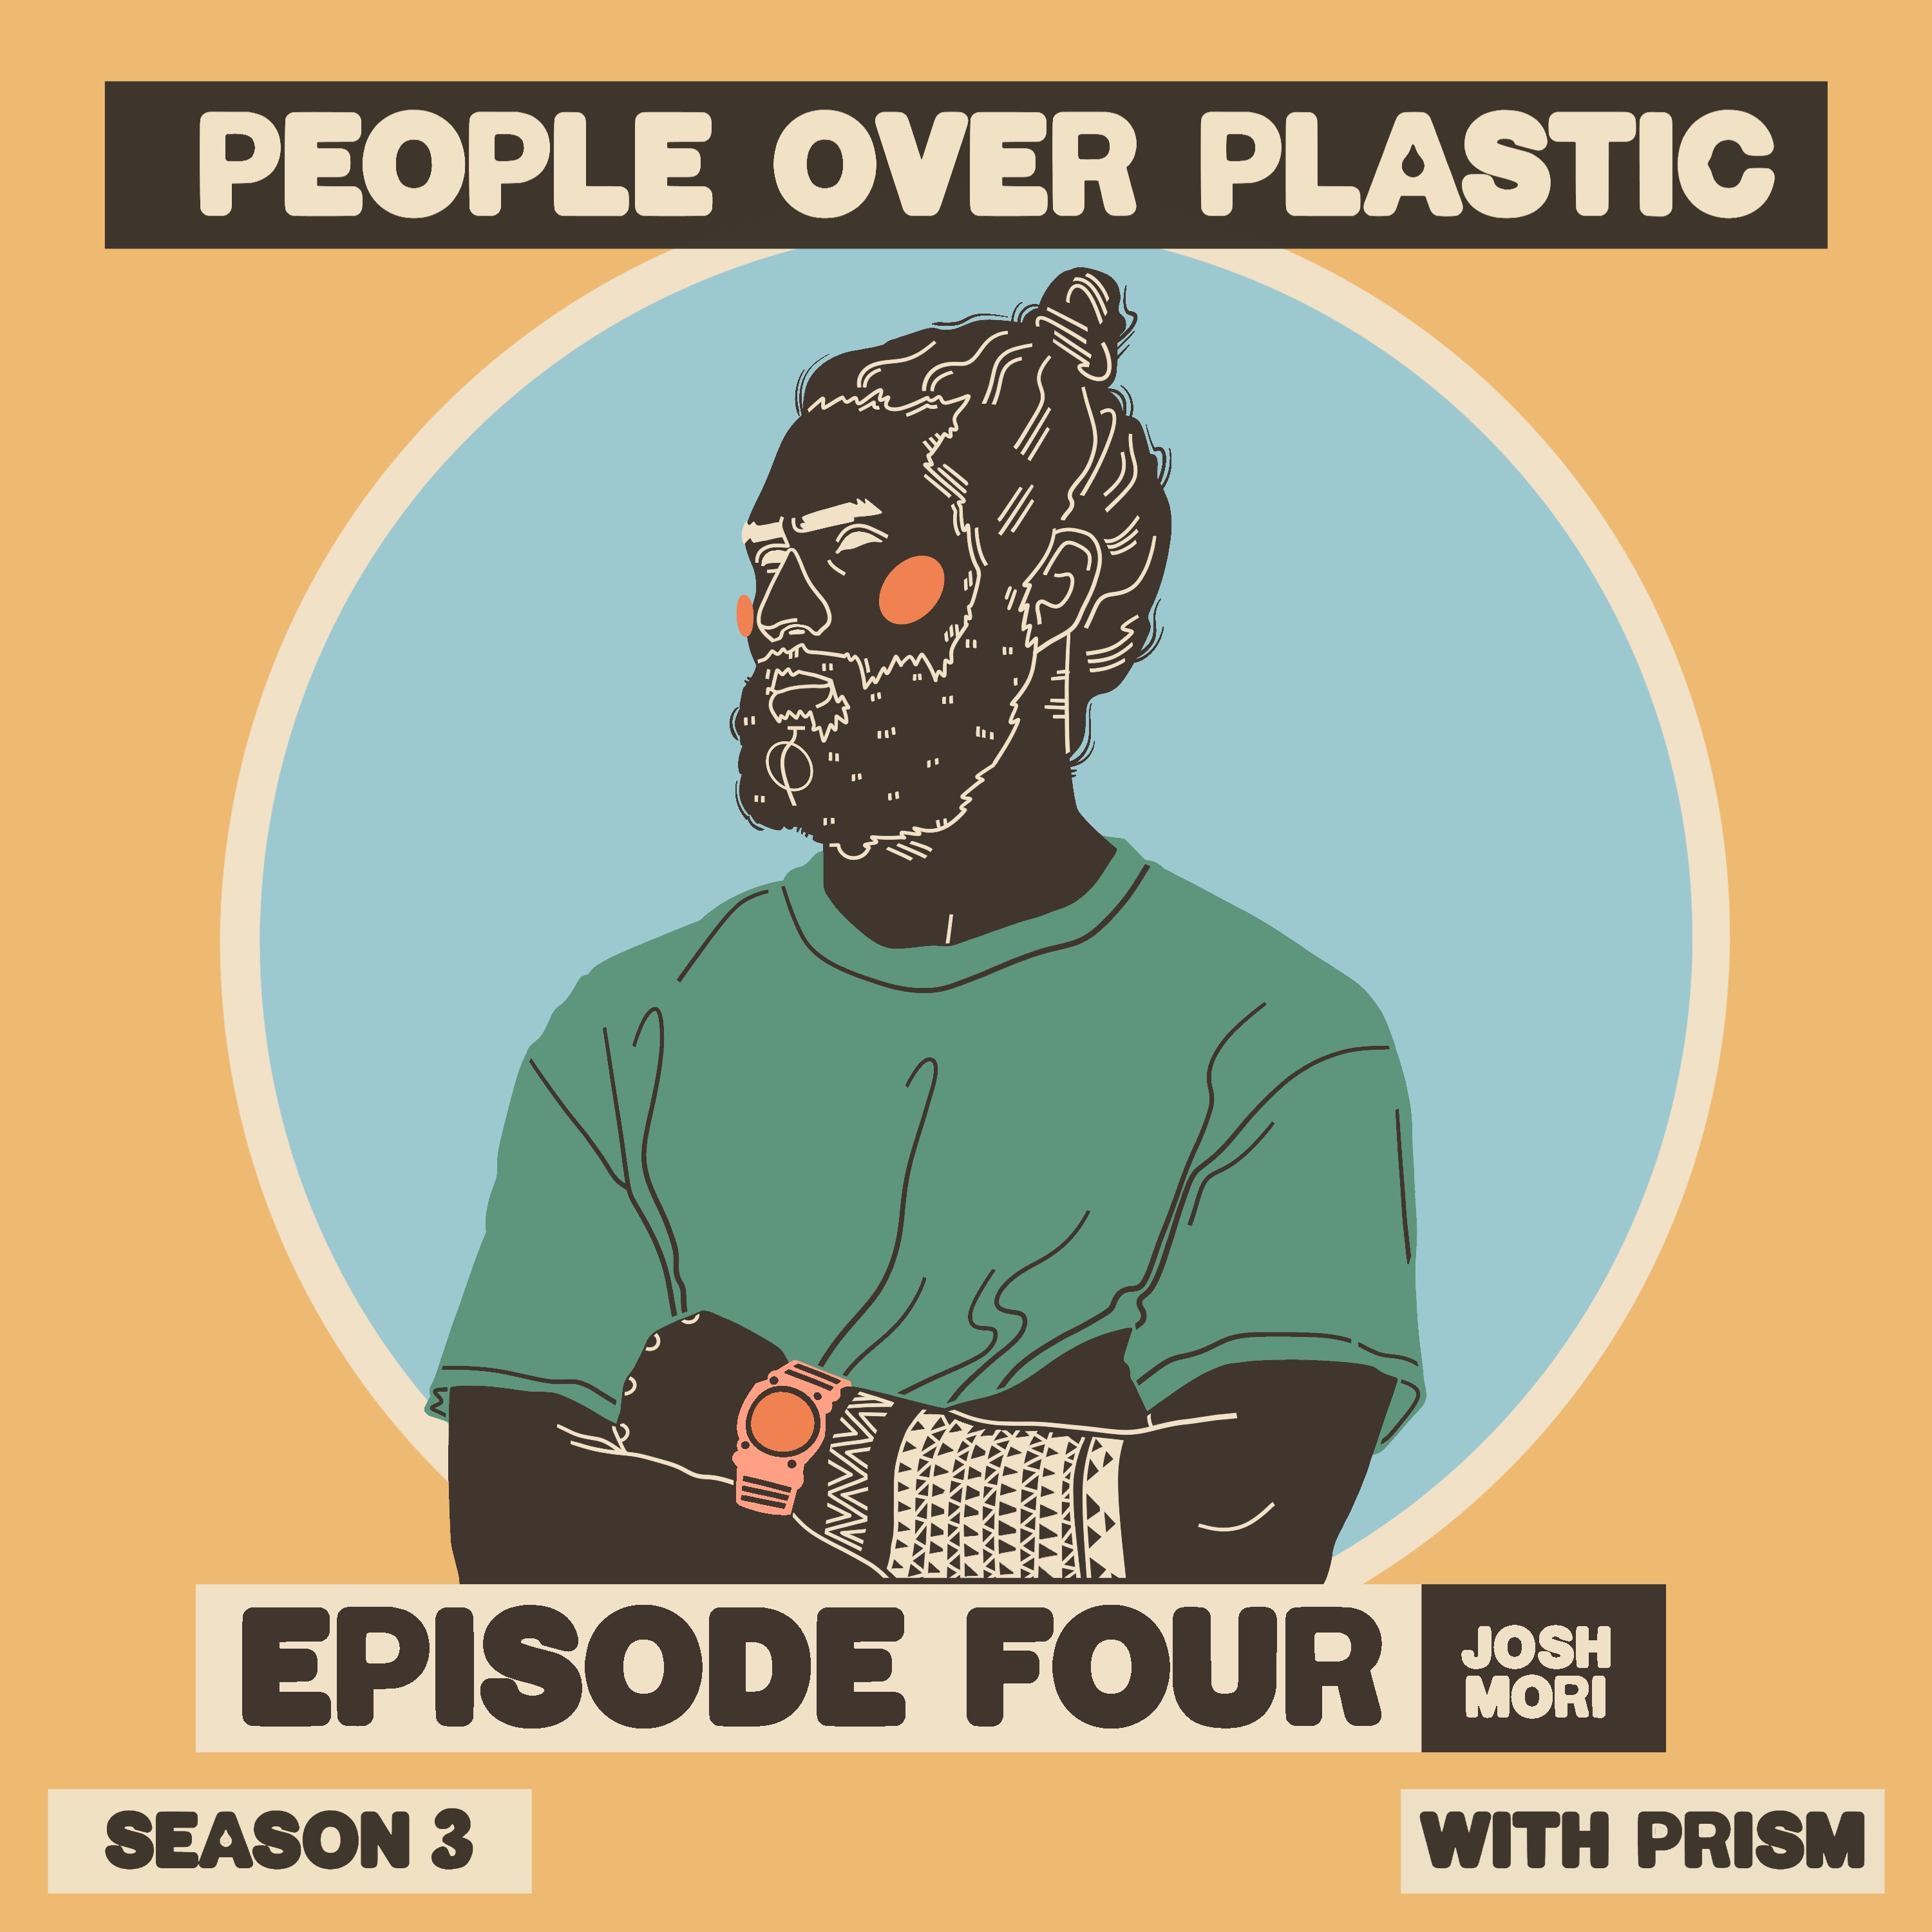 An illustration of Josh Mori over a yellow background. Josh has his arms crossed and is looking to the right with the determined look. Above the illustration reads “PEOPLE OVER PLASTIC.“ Below reads “EPISODE FOUR - JOSH MORI. SEASON 3. WITH PRISM.“